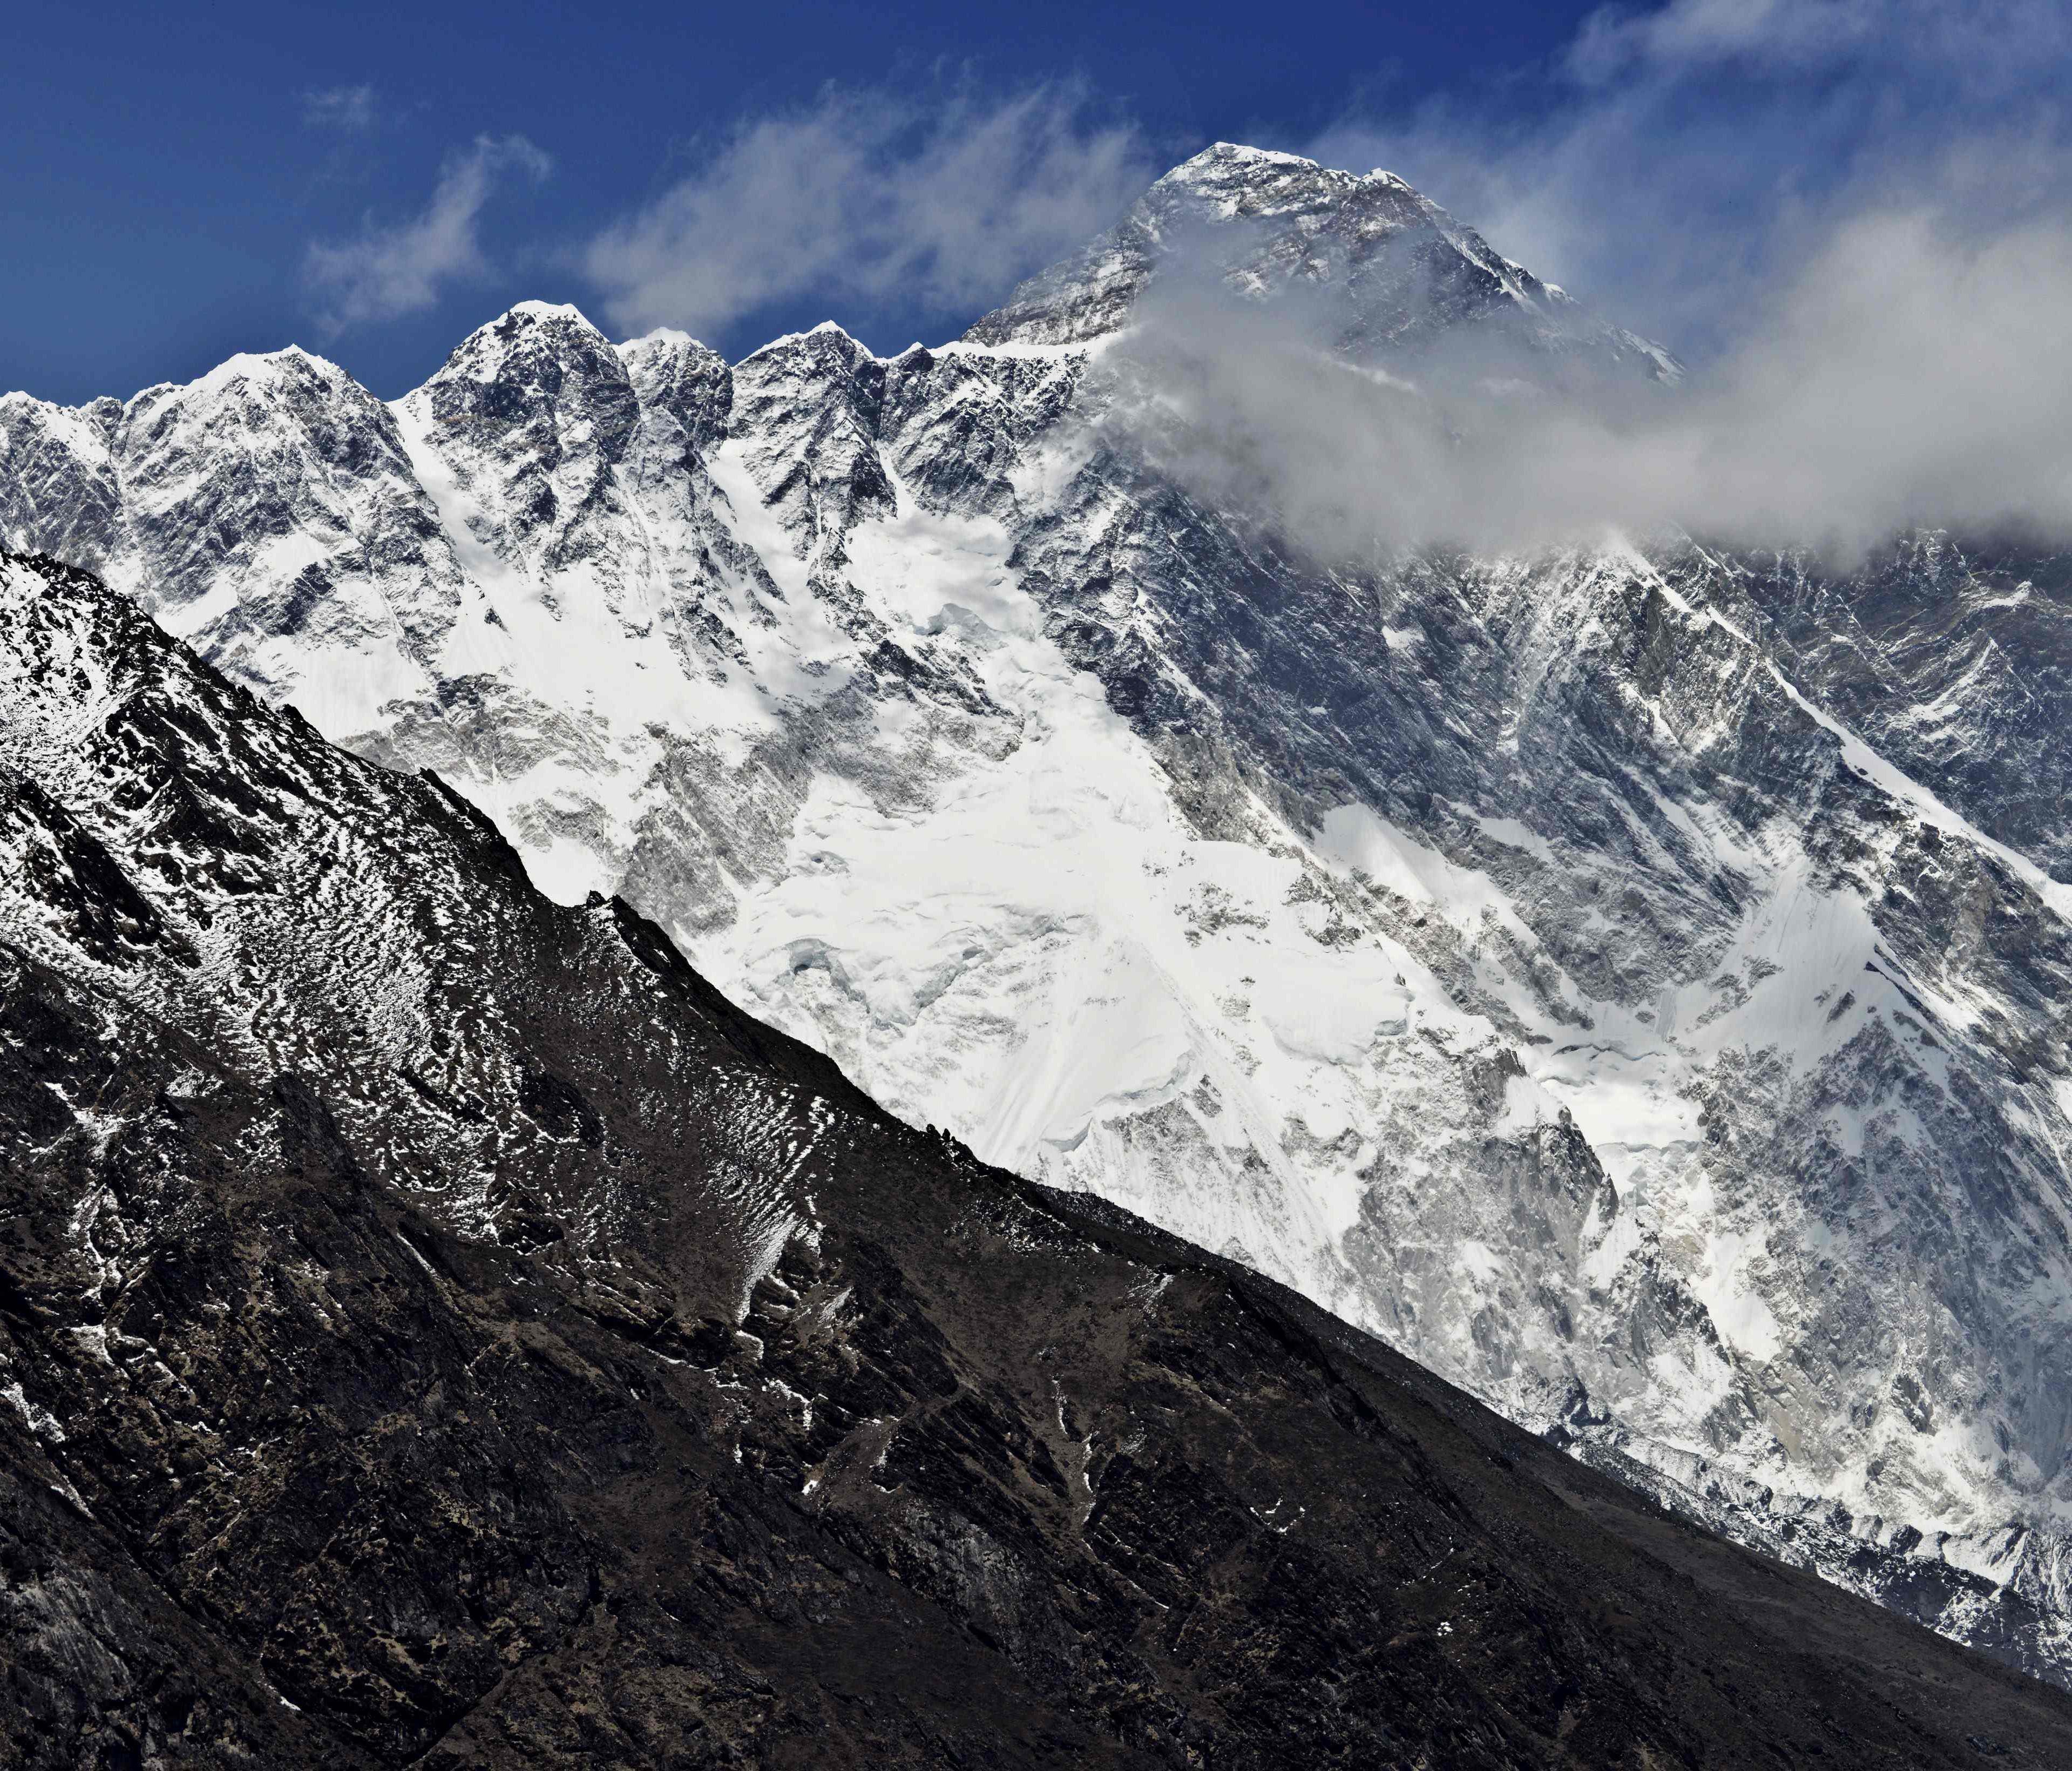 Mount Everest is seen in the background from the village of Tembuche in the Kumbh region of north-eastern Nepal.